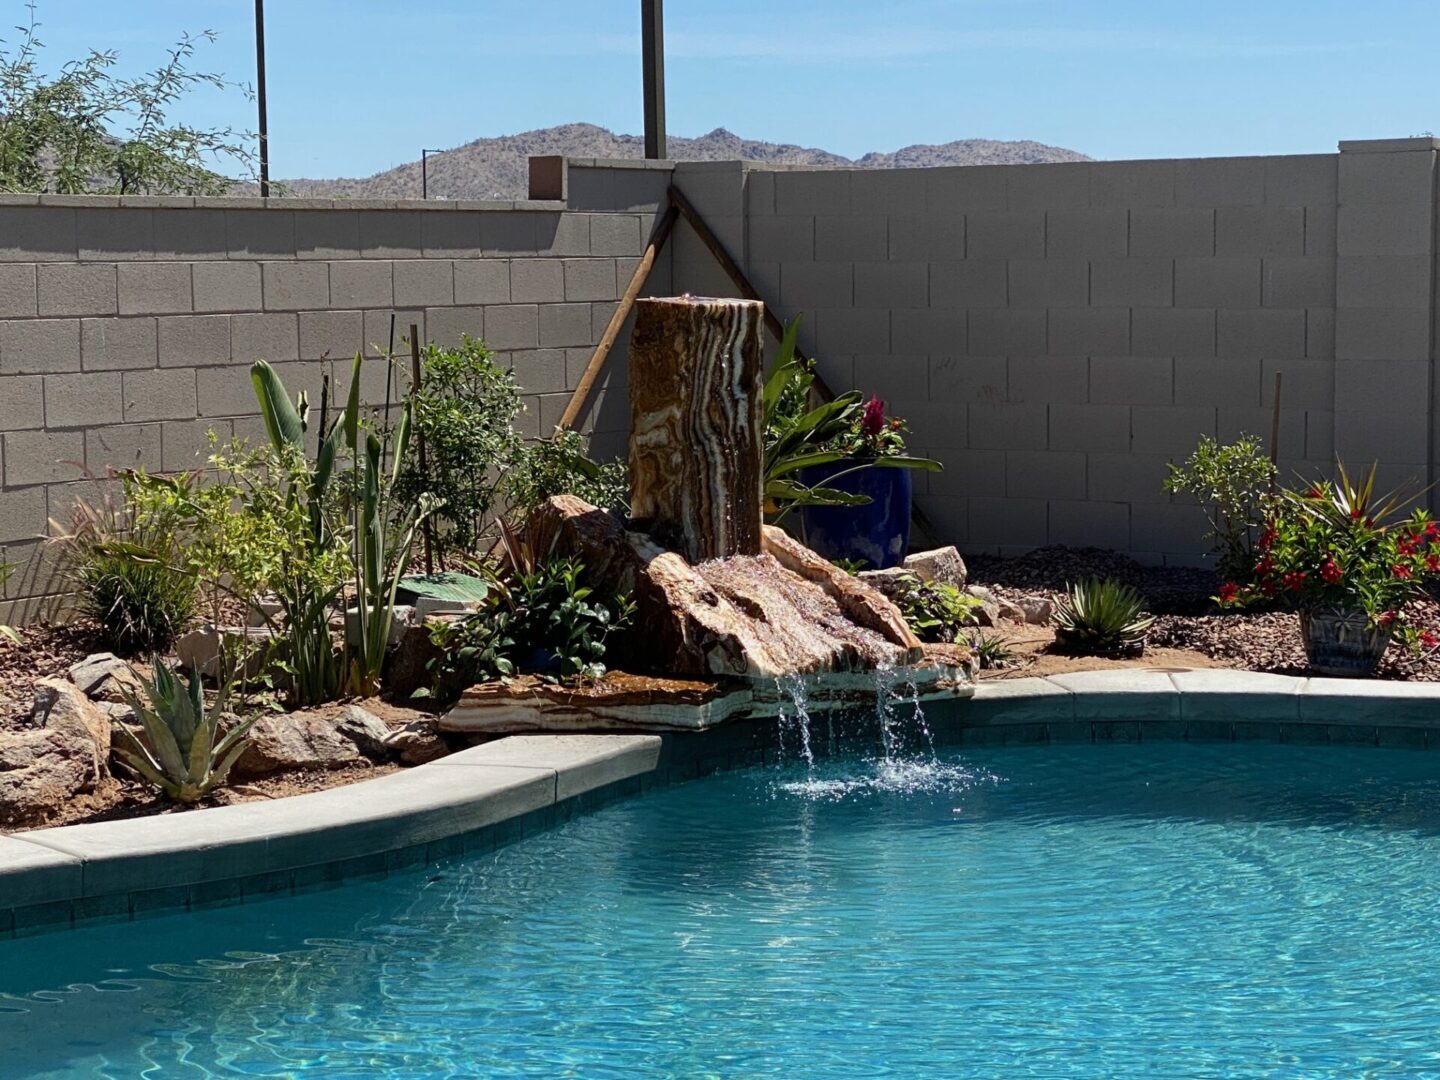 The finished look of landscaping services in Buckeye, AZ